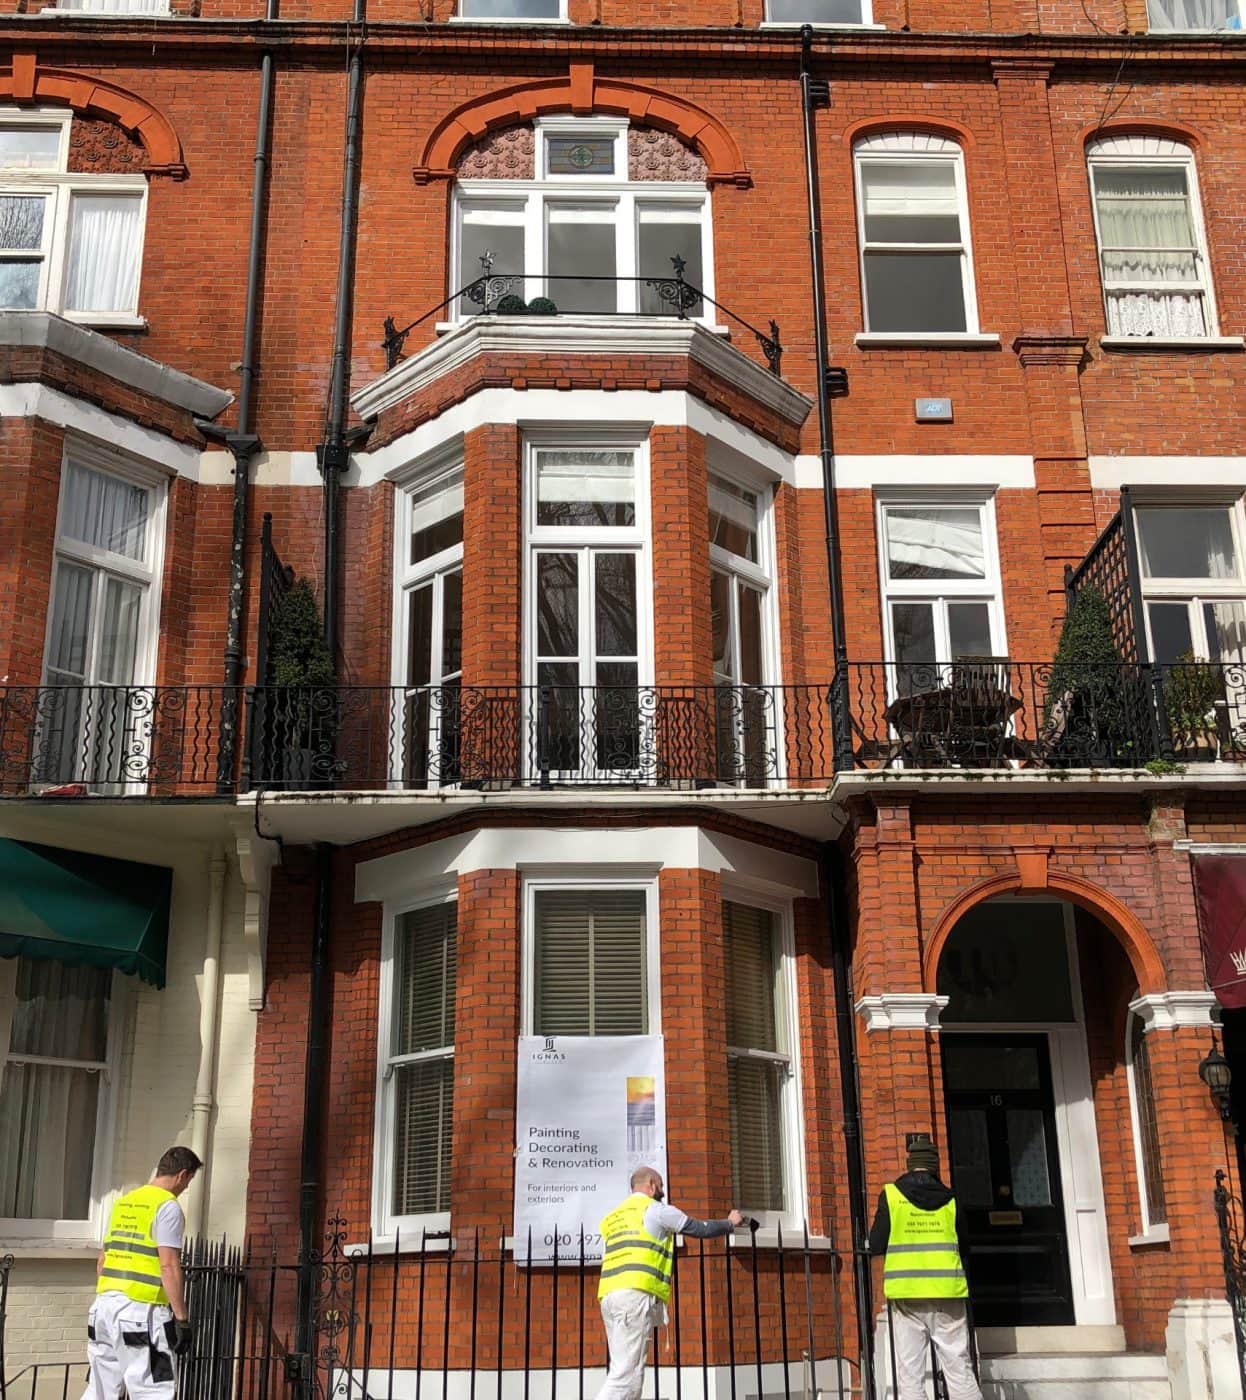 BGL Painting and Decorating / Painter and decorator | in South Kensington,  London | Gumtree